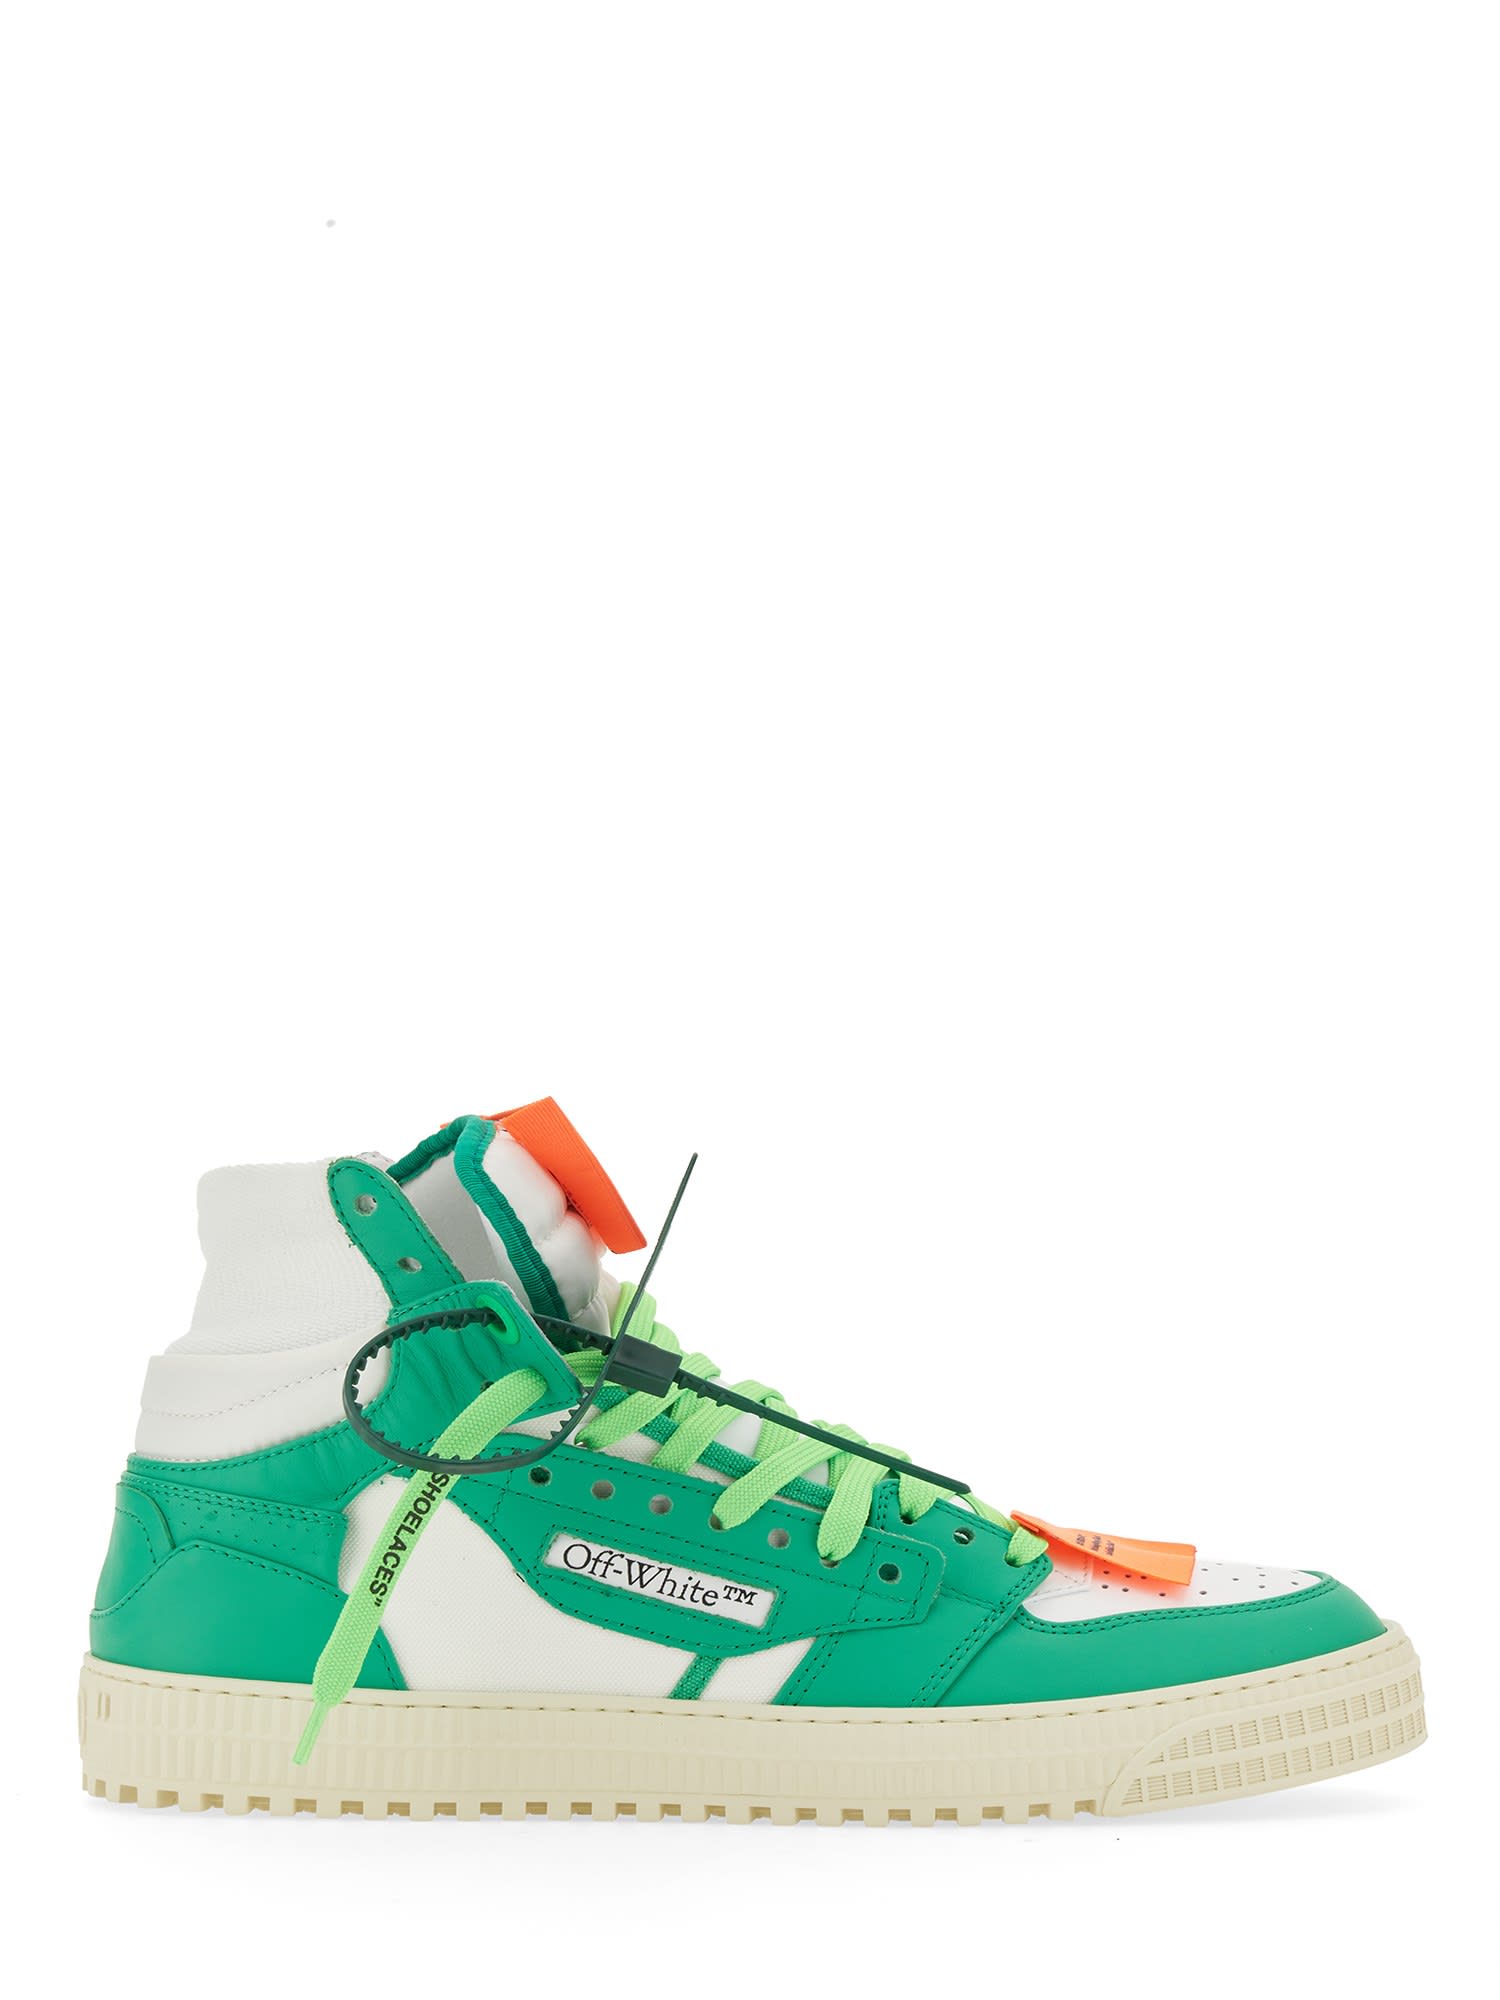 Off-White c/o Virgil Abloh Ooo Low Sartorial Stitching Sneakers in